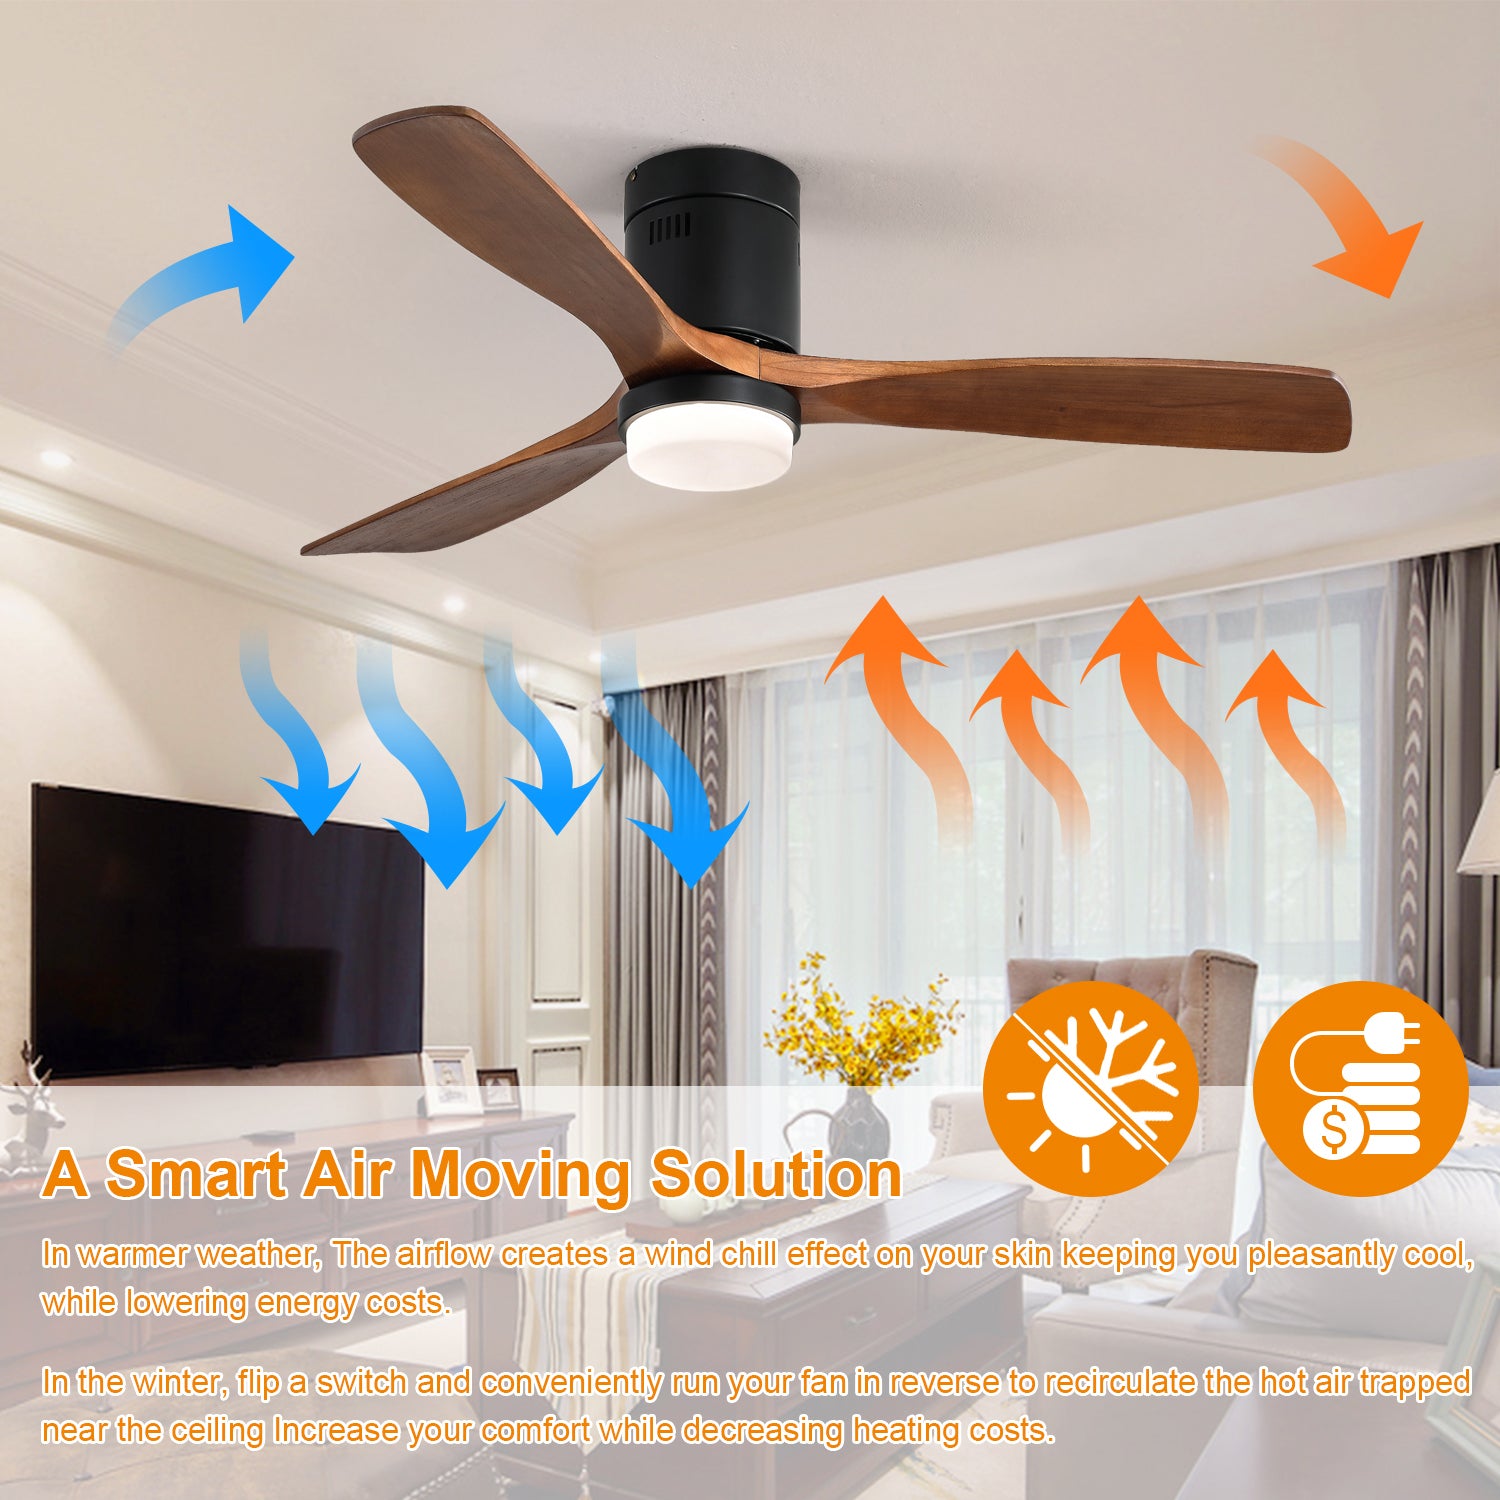 Low Profile Ceiling Fan With Lights 3 Carved Wood Fan Blade Noiseless Reversible Motor Remote Control With Light - Tonkn